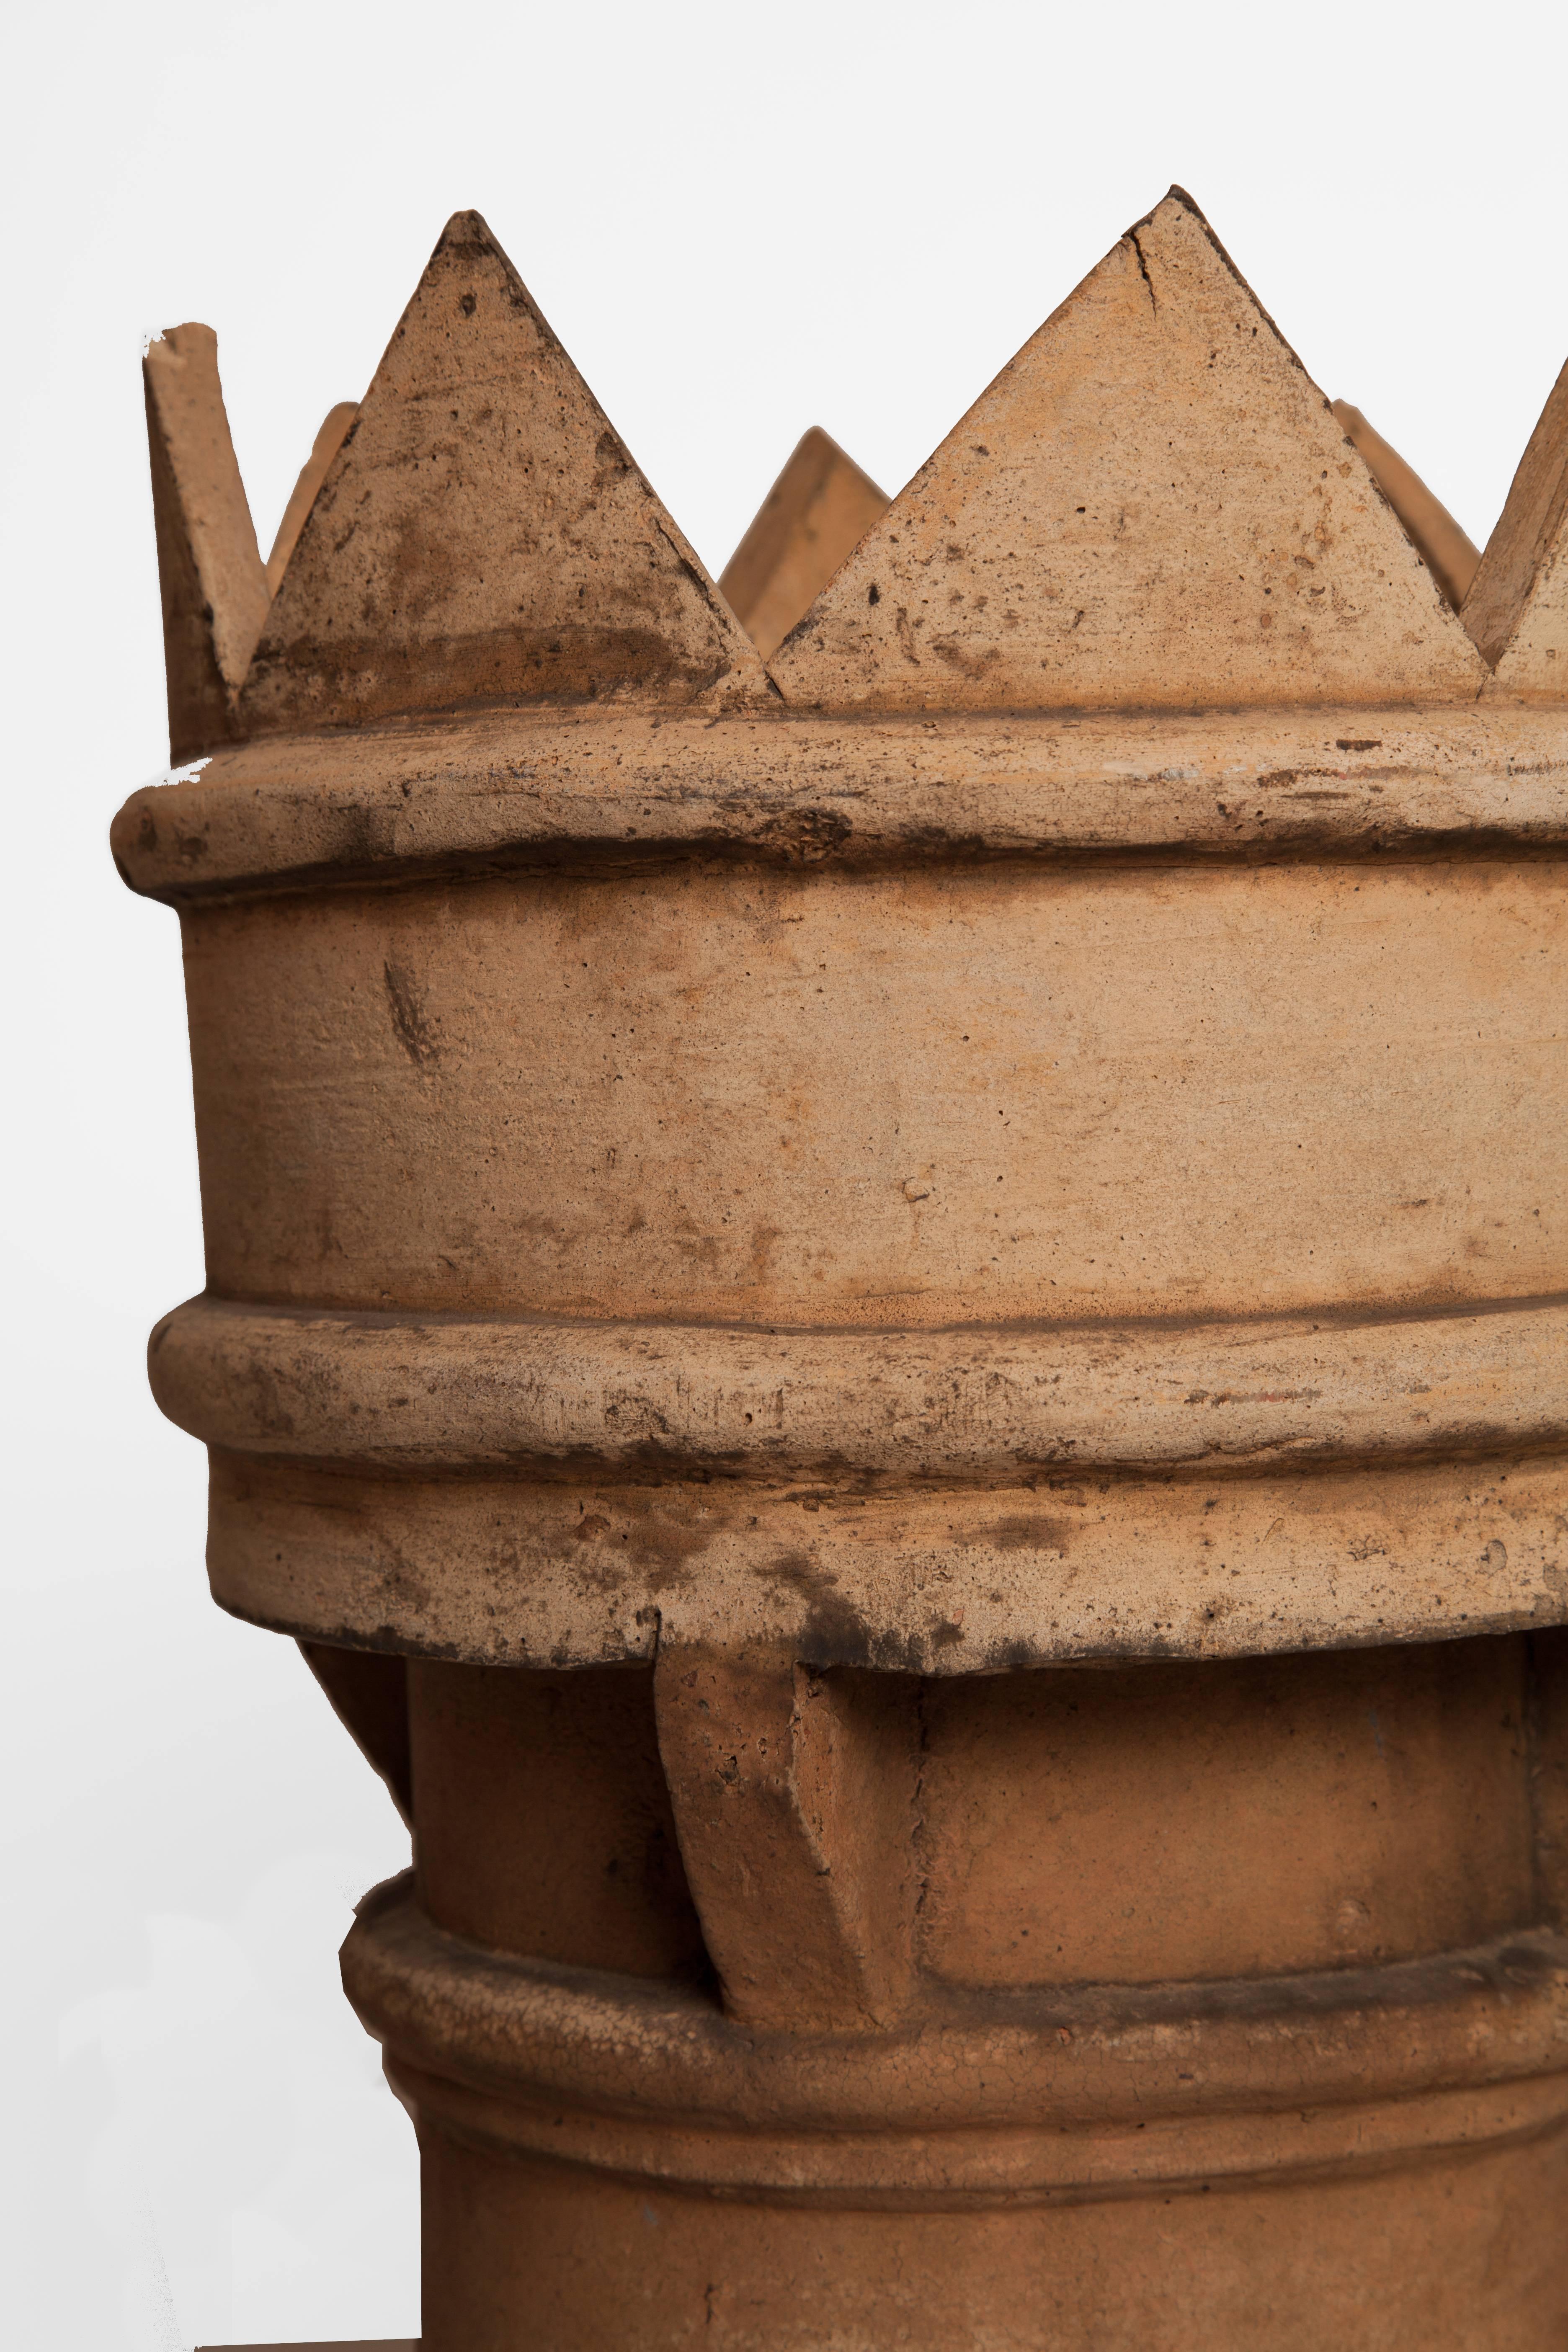 Pair of 19th century English Chimney pots in excellent condition.